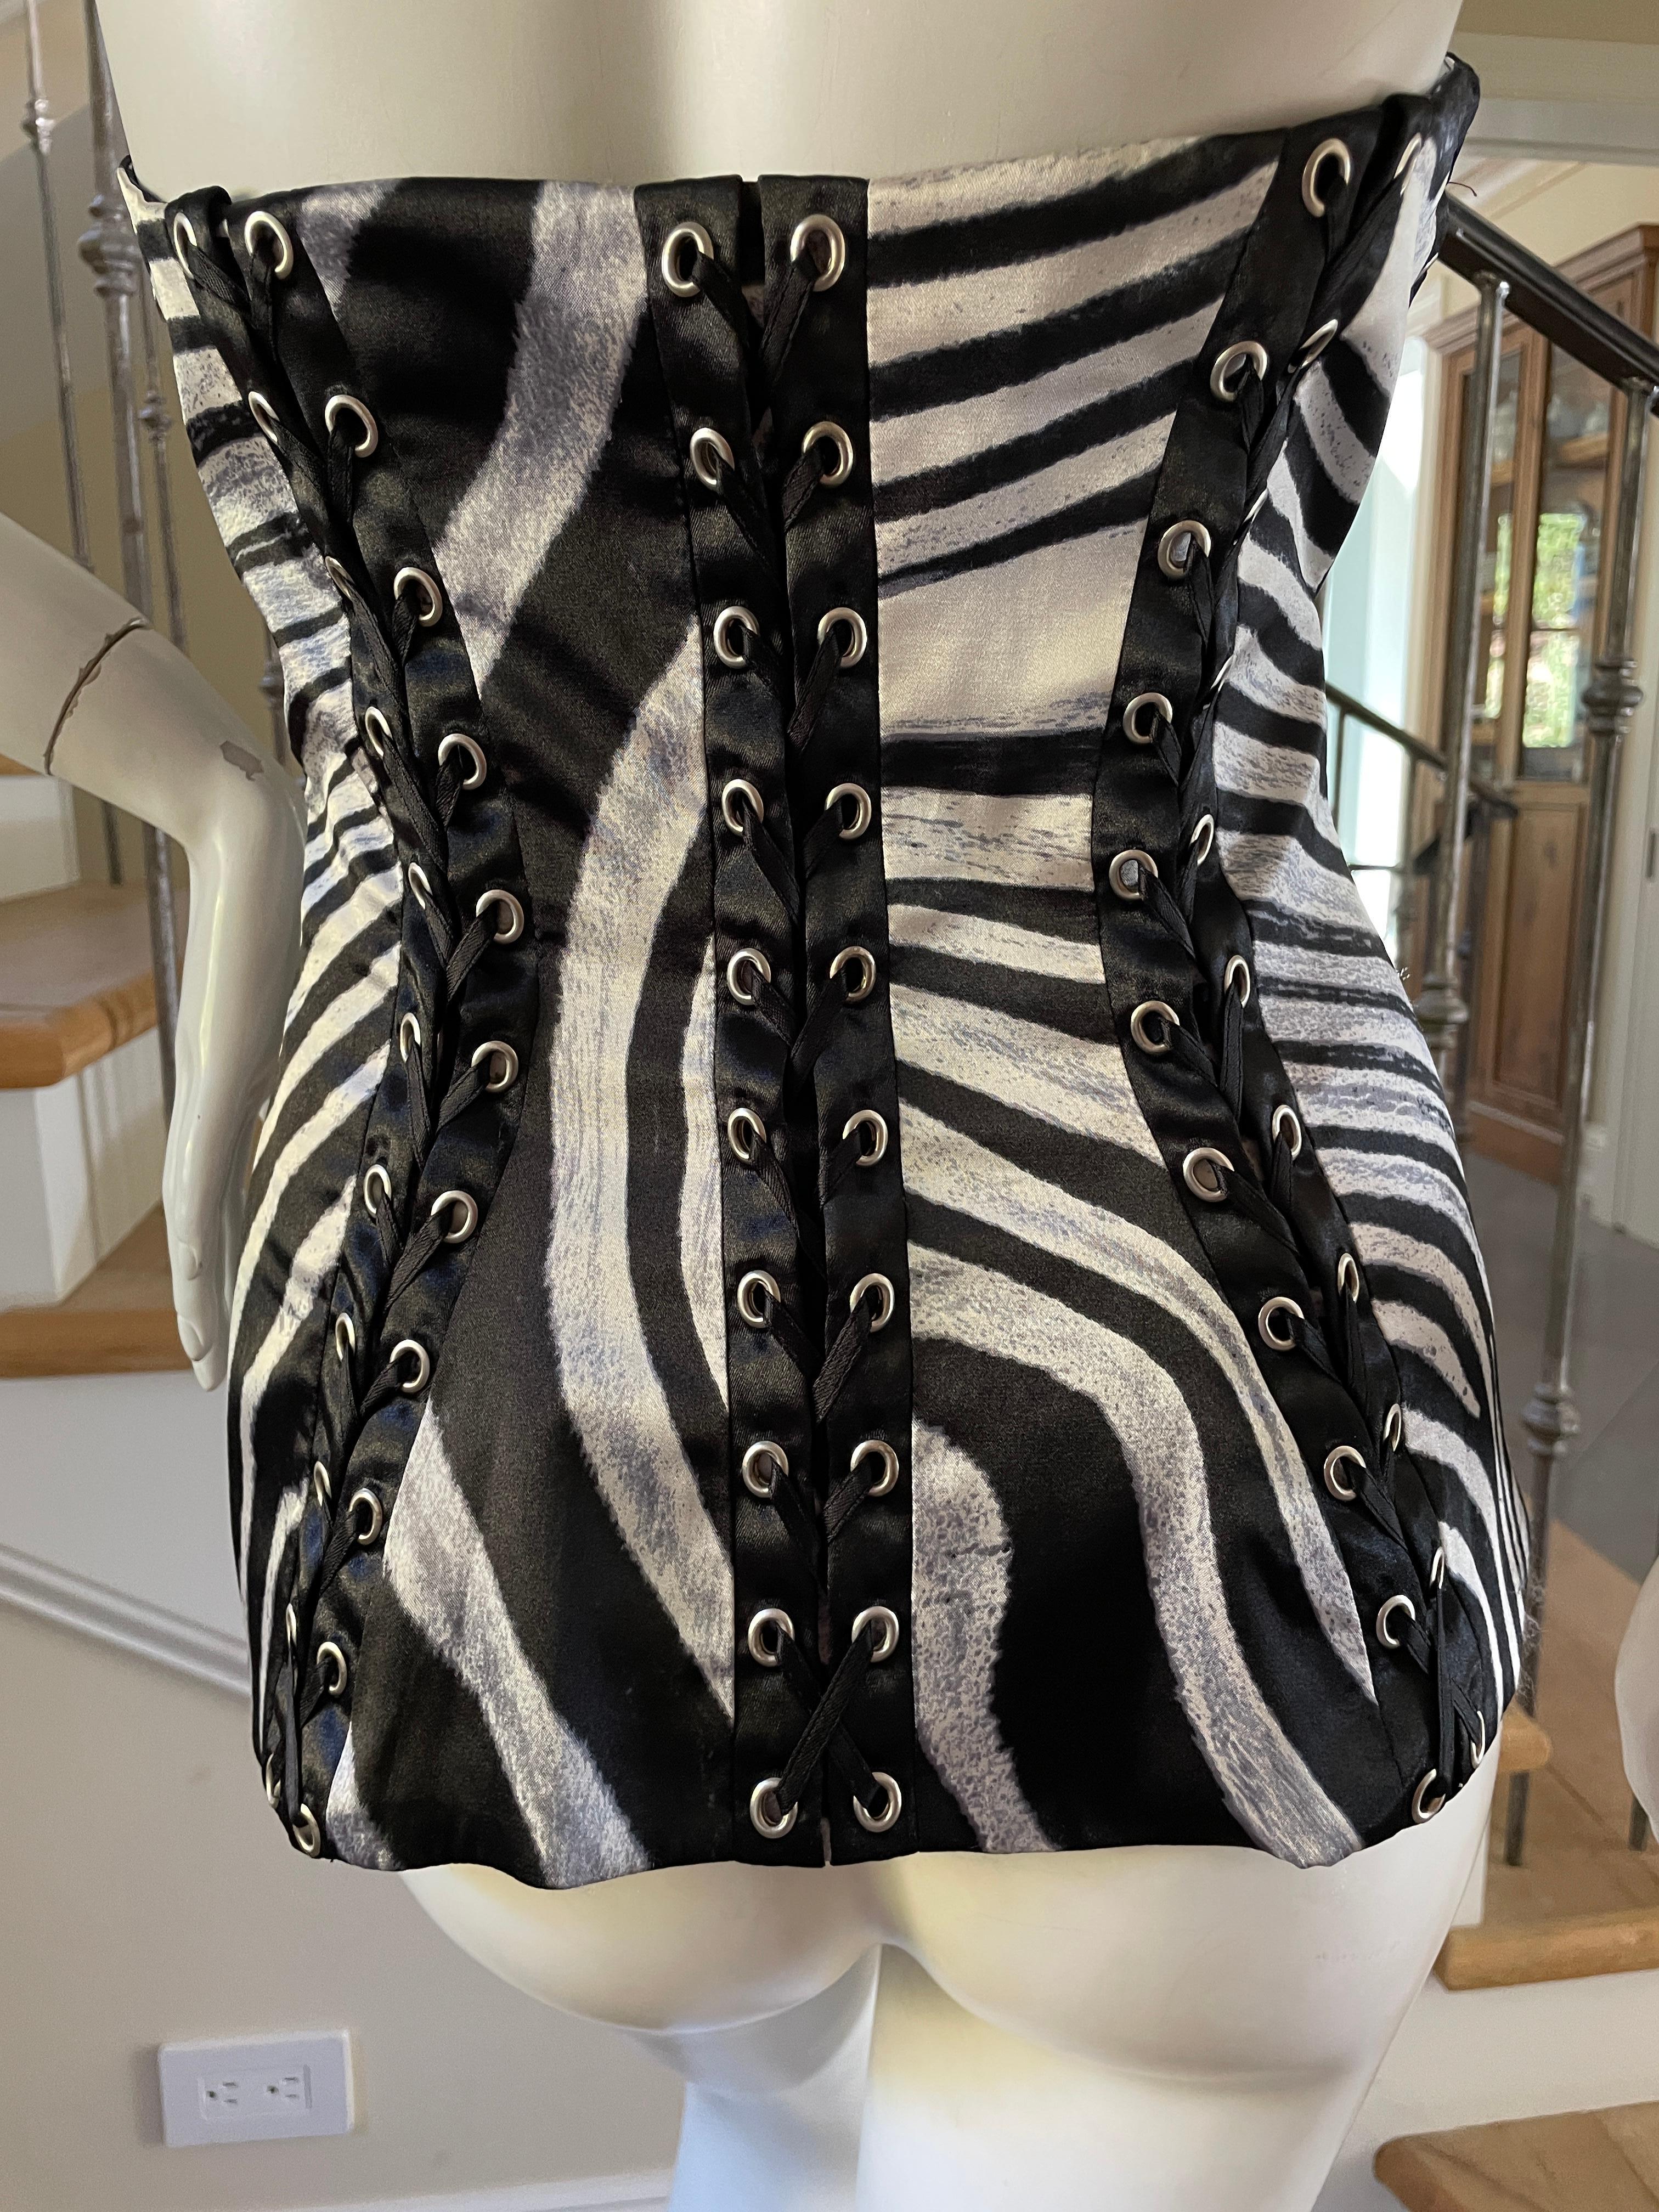 Roberto Cavalli for Just Cavalli Zebra Print Corset with Lace Up Details  For Sale 3